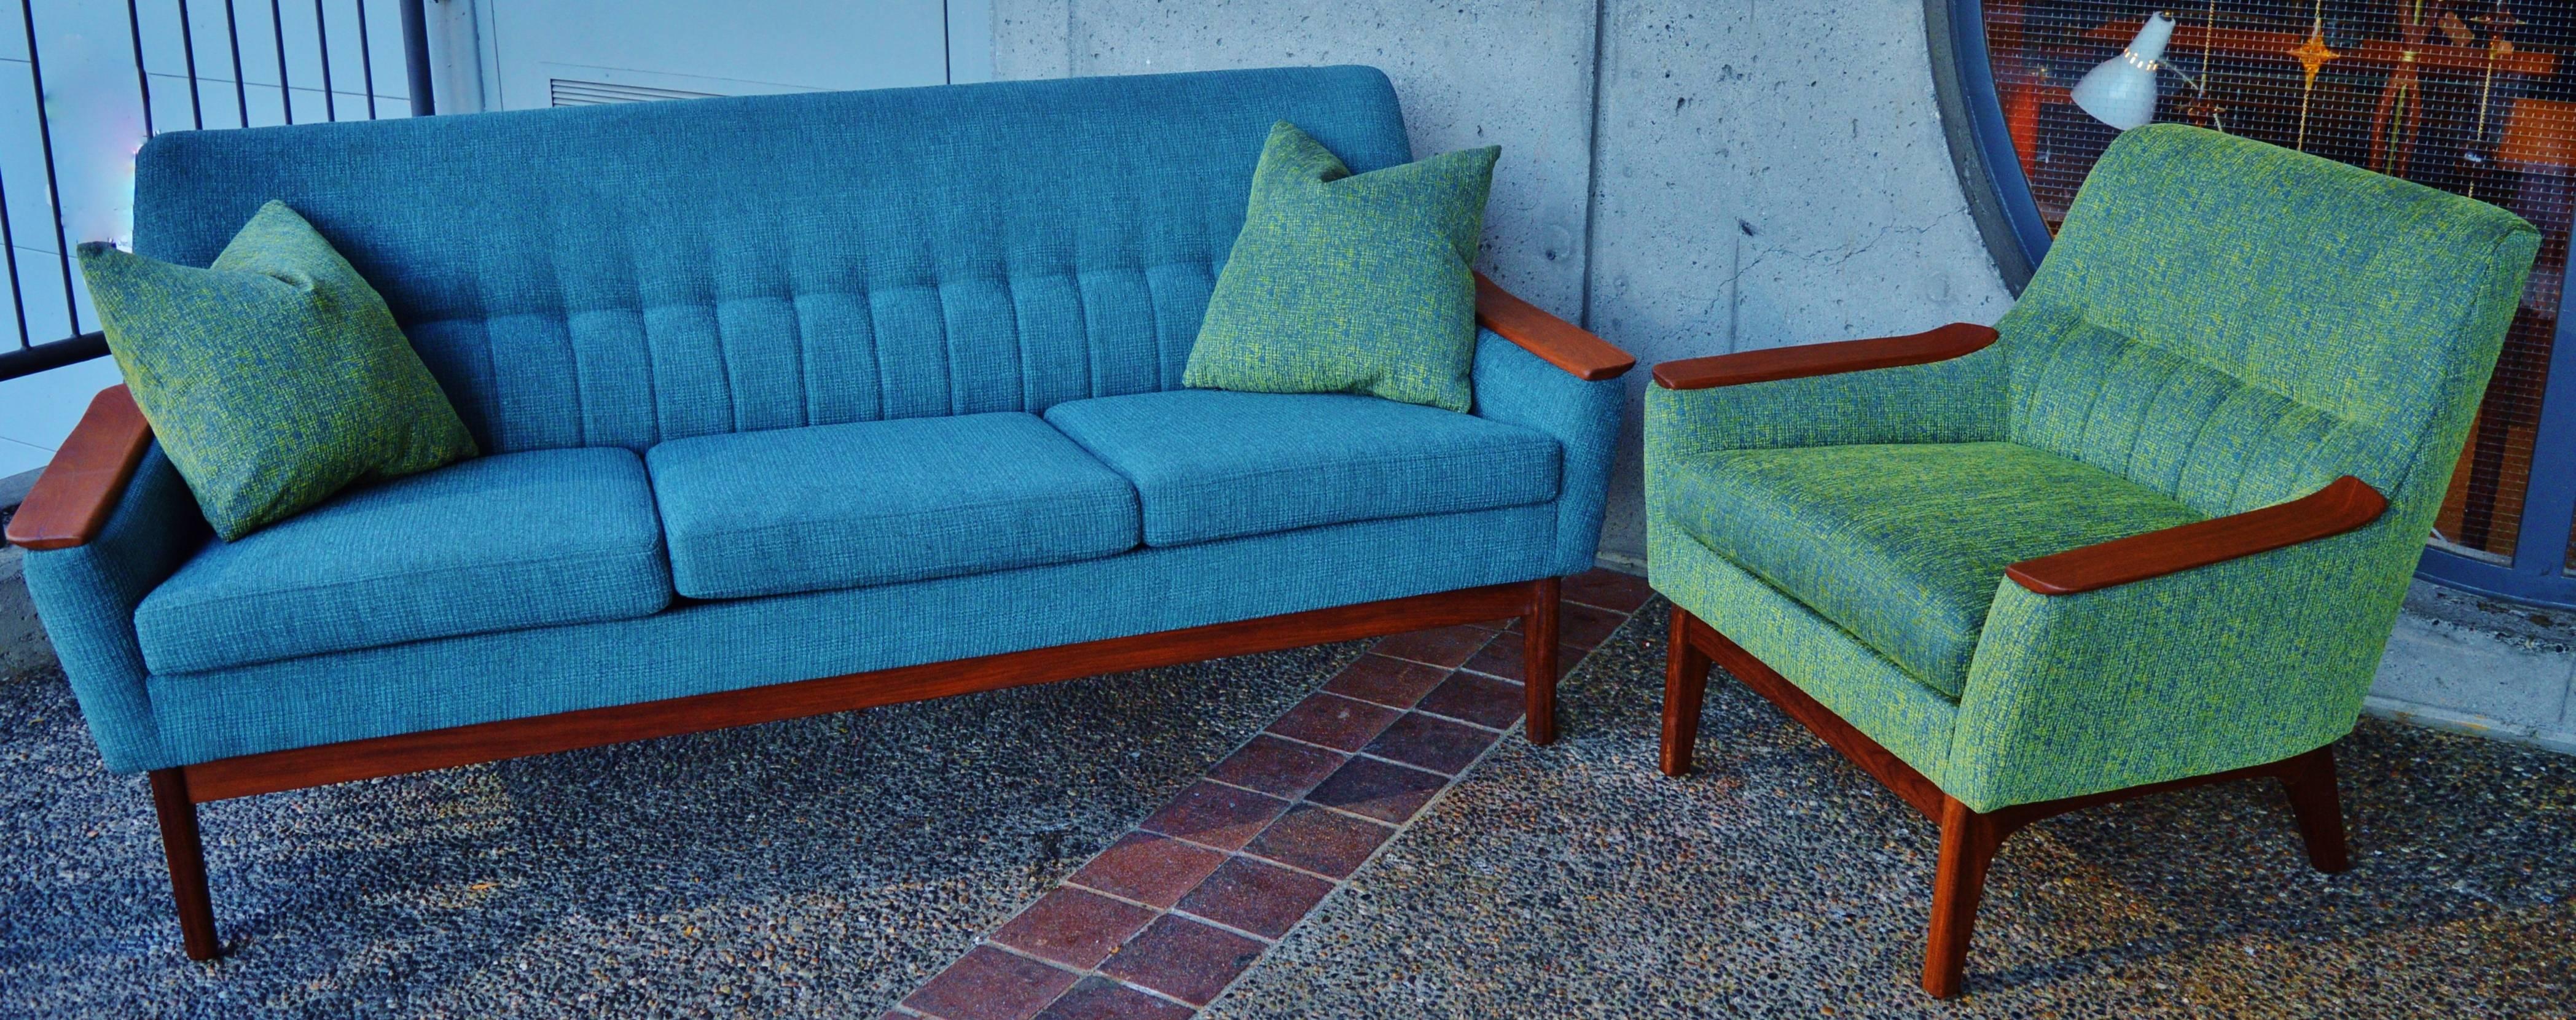 This spectacular Danish Modern teak fully upholstered sofa and lounge chair have been completely stripped to the bare bones and rebuilt with new Pirelli strapping, top quality 25 year foam and complementary fabrics--the sofa in a rich teal tweed and